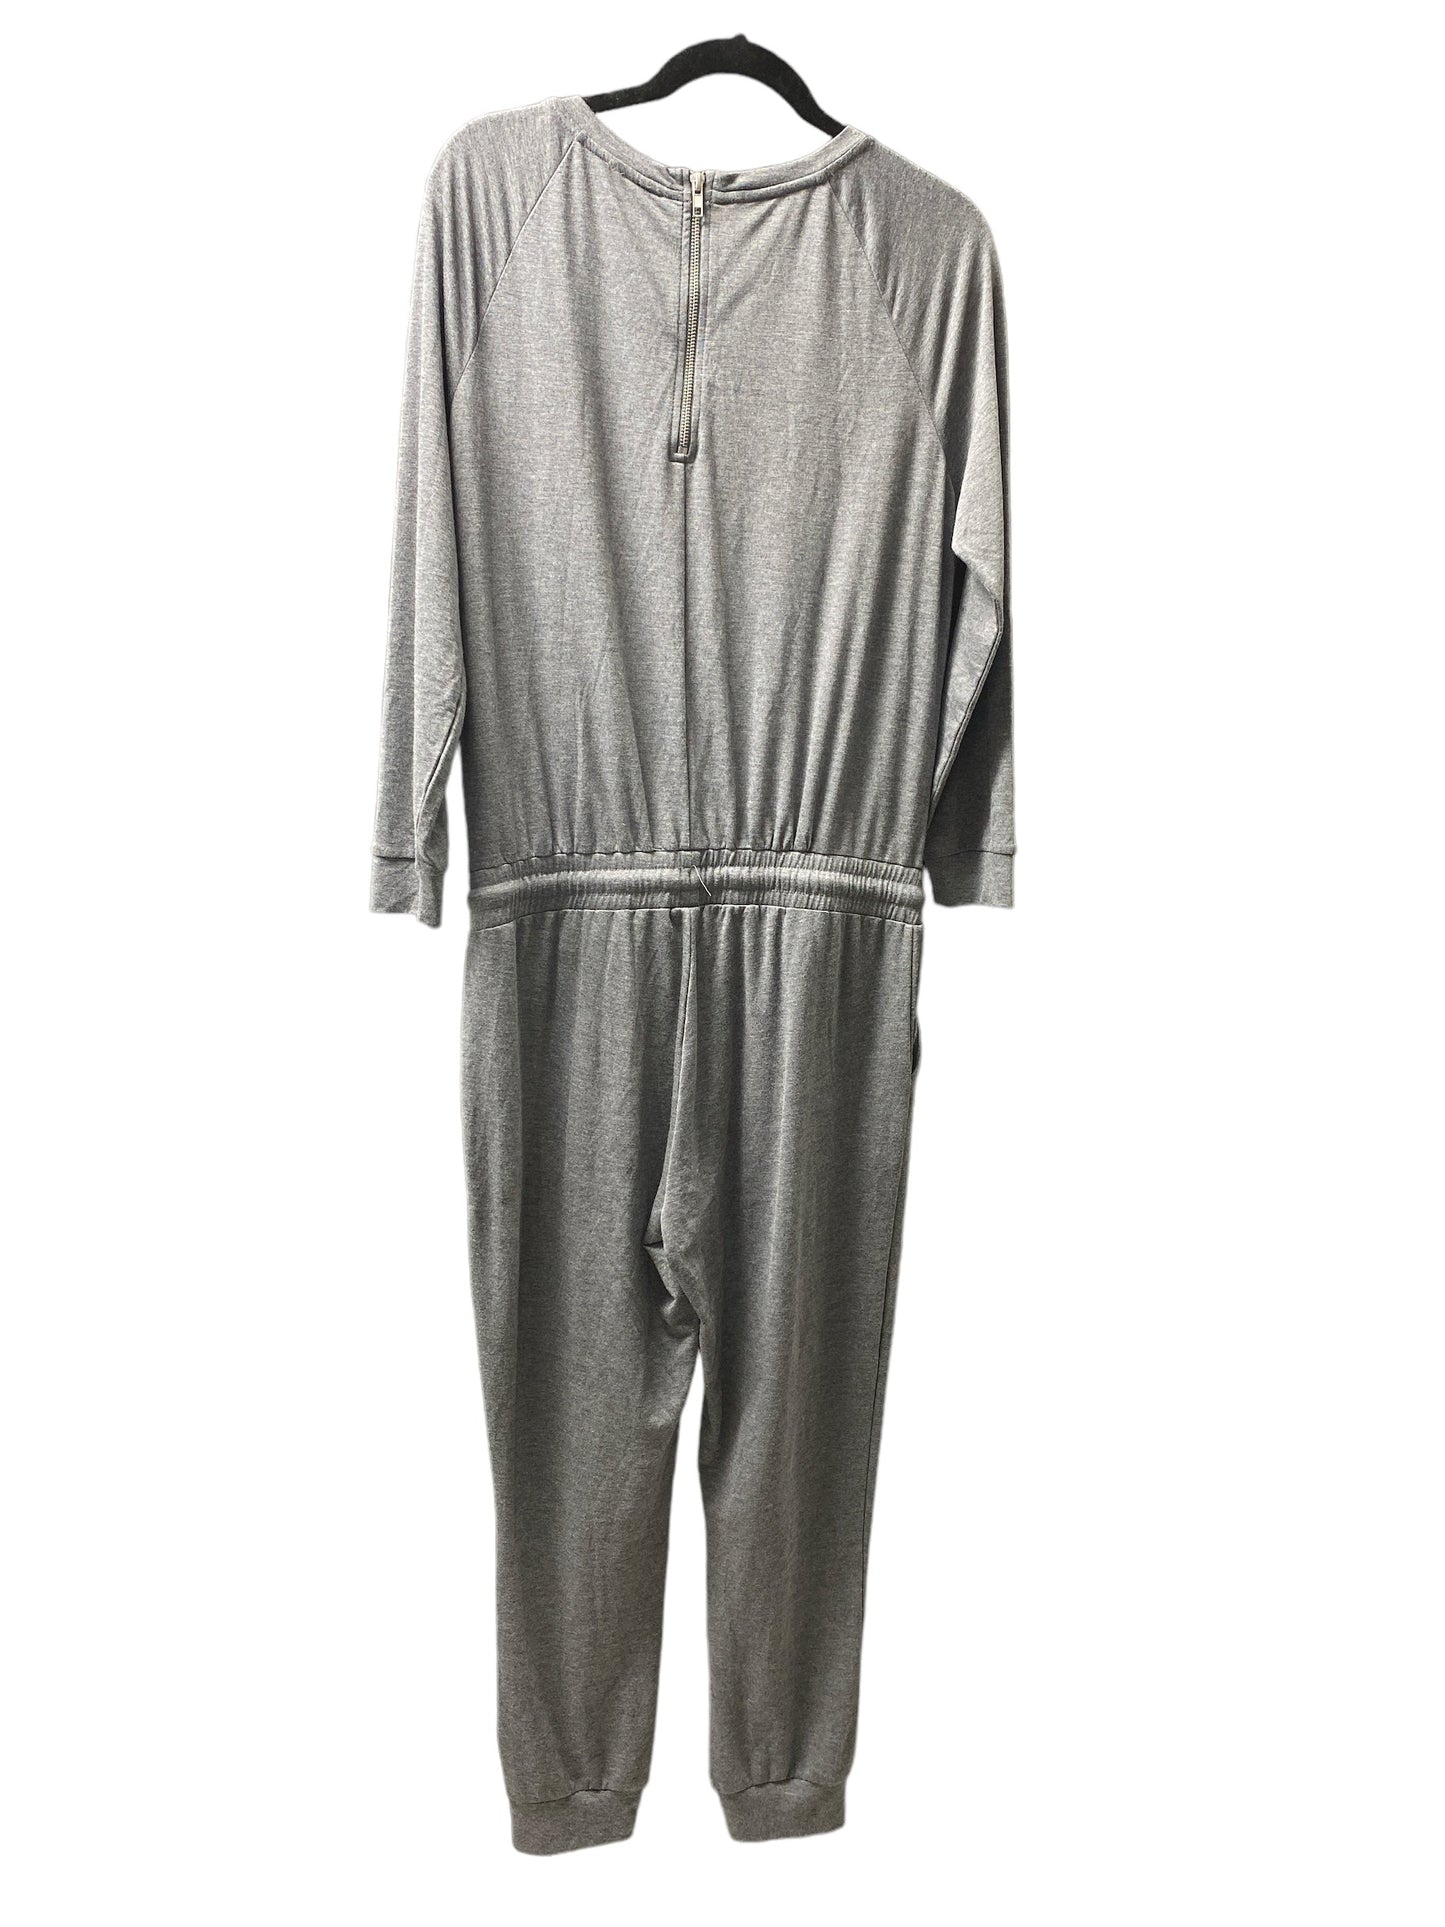 Jumpsuit By Soho Design Group  Size: S